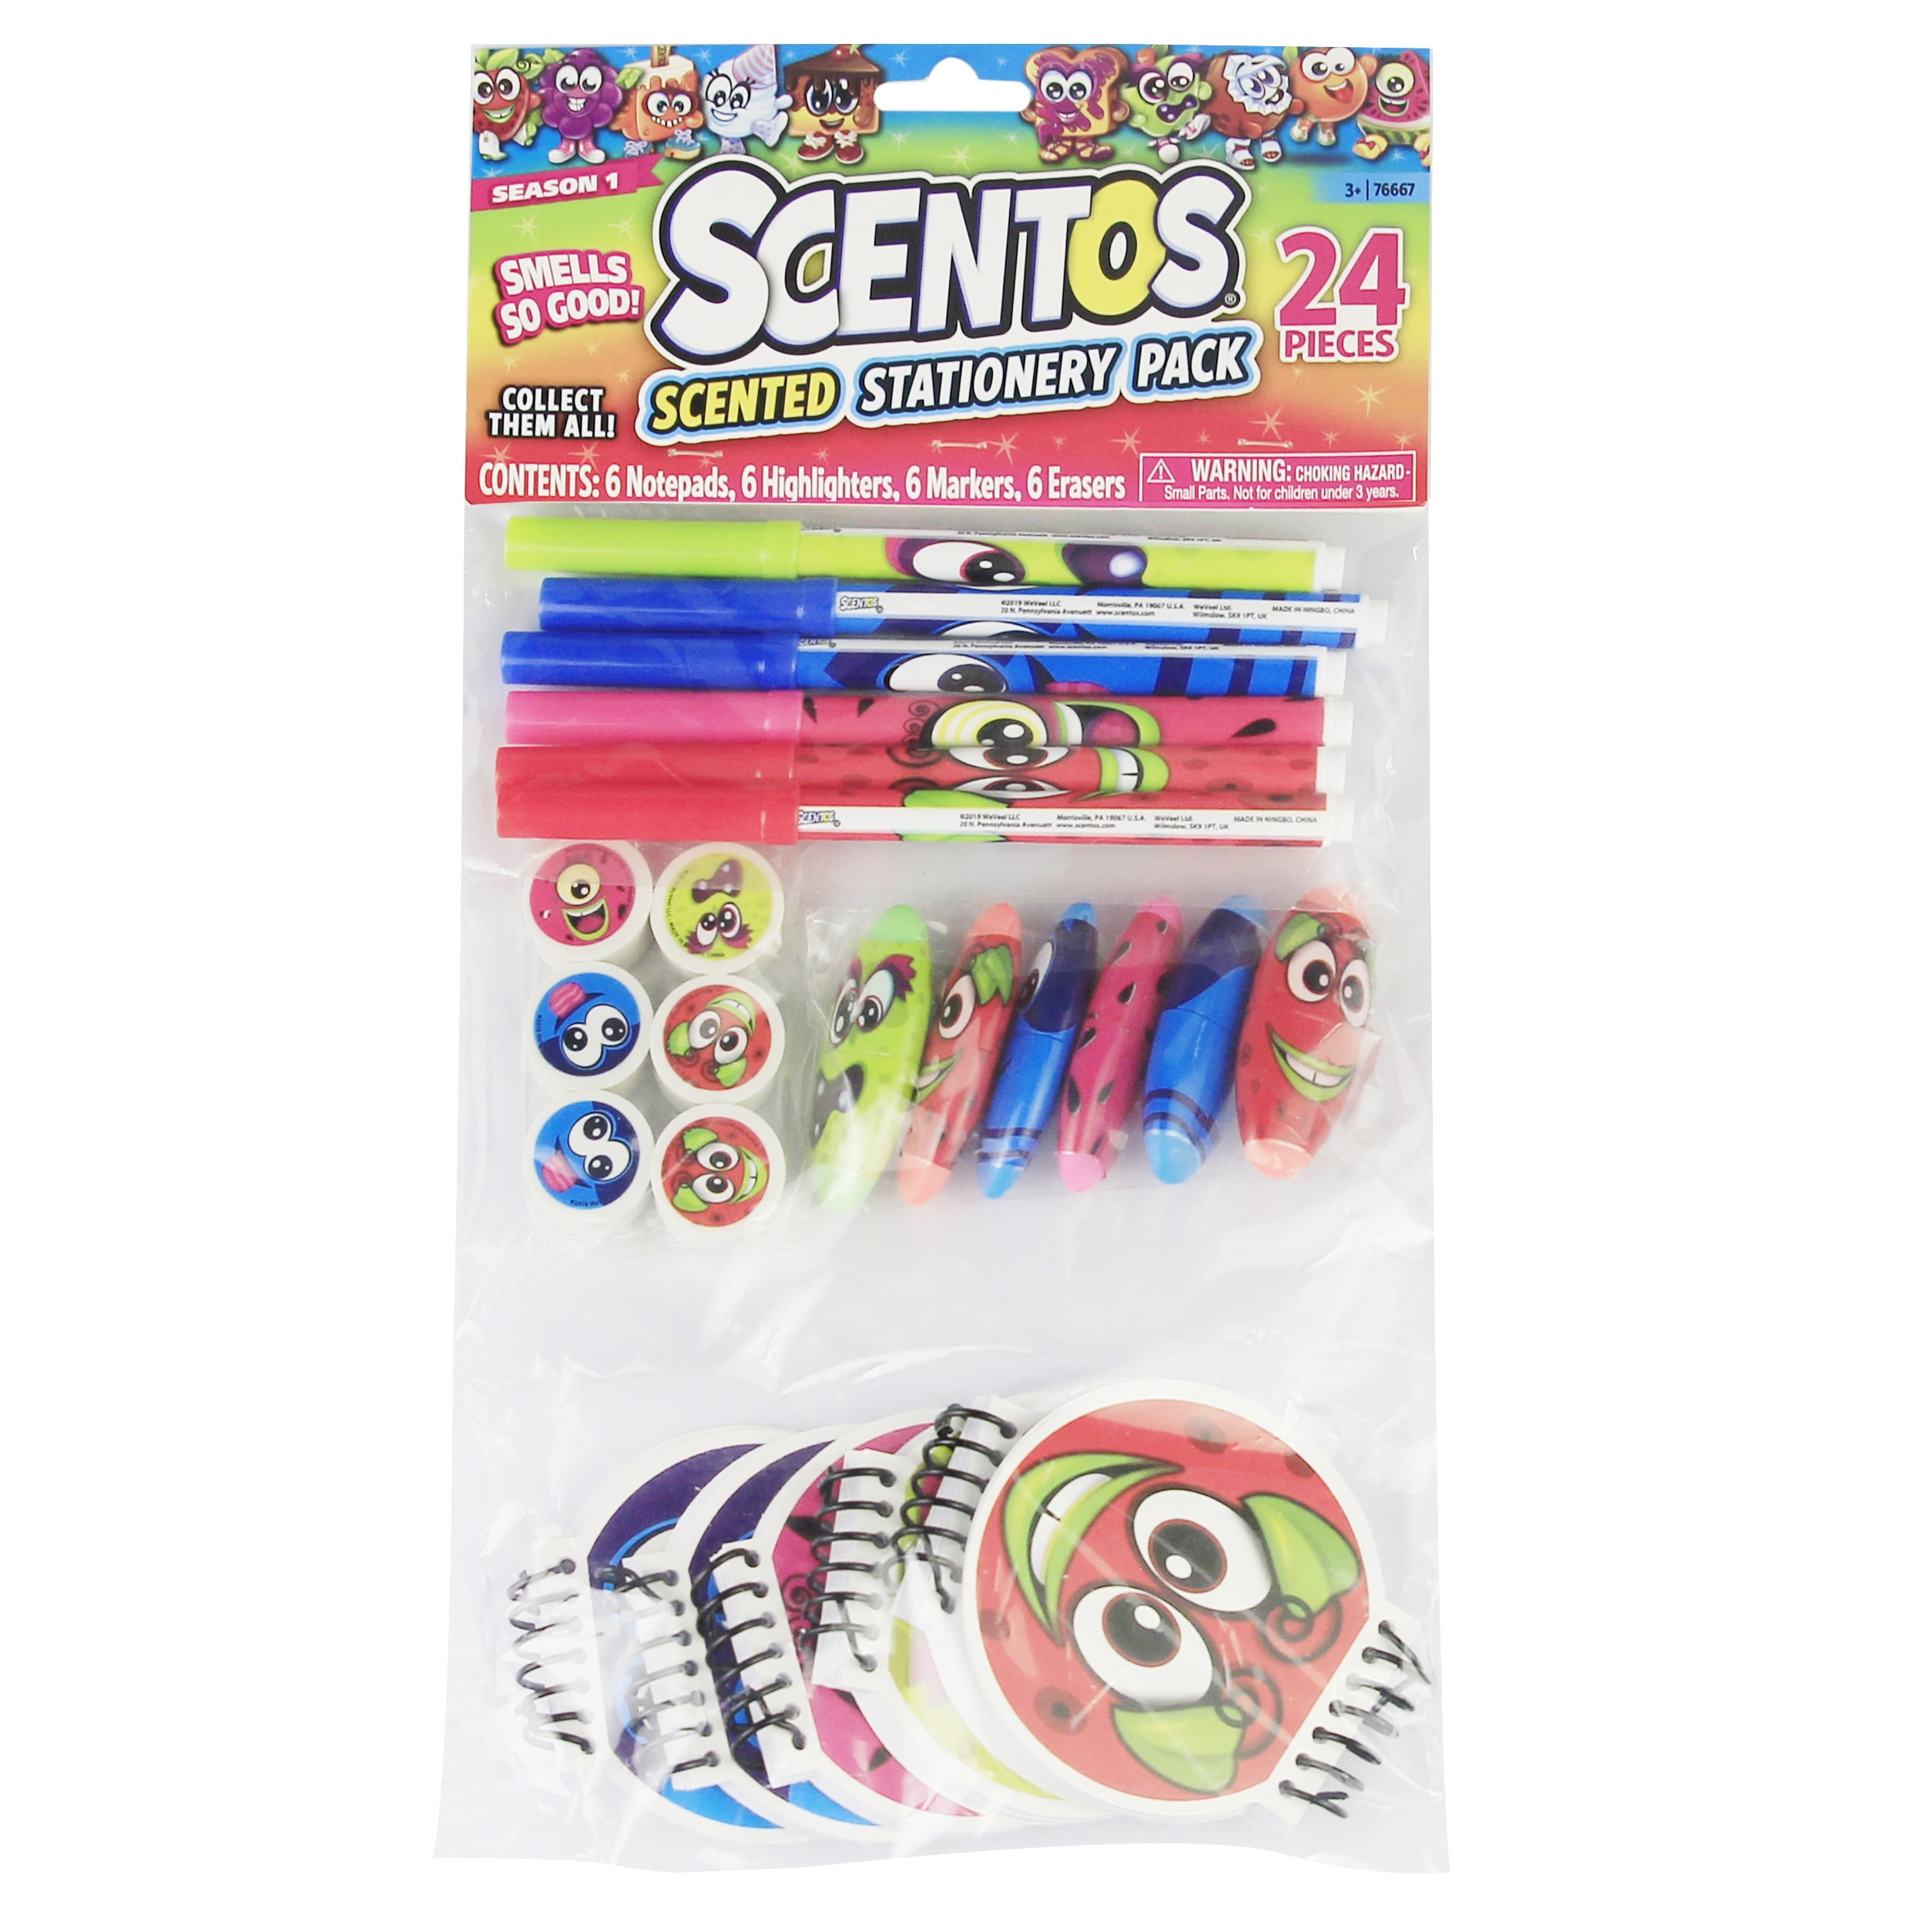 12pcs Cute Pencils Stationary Party Favor School Supplies Birthday Gift for Kids 